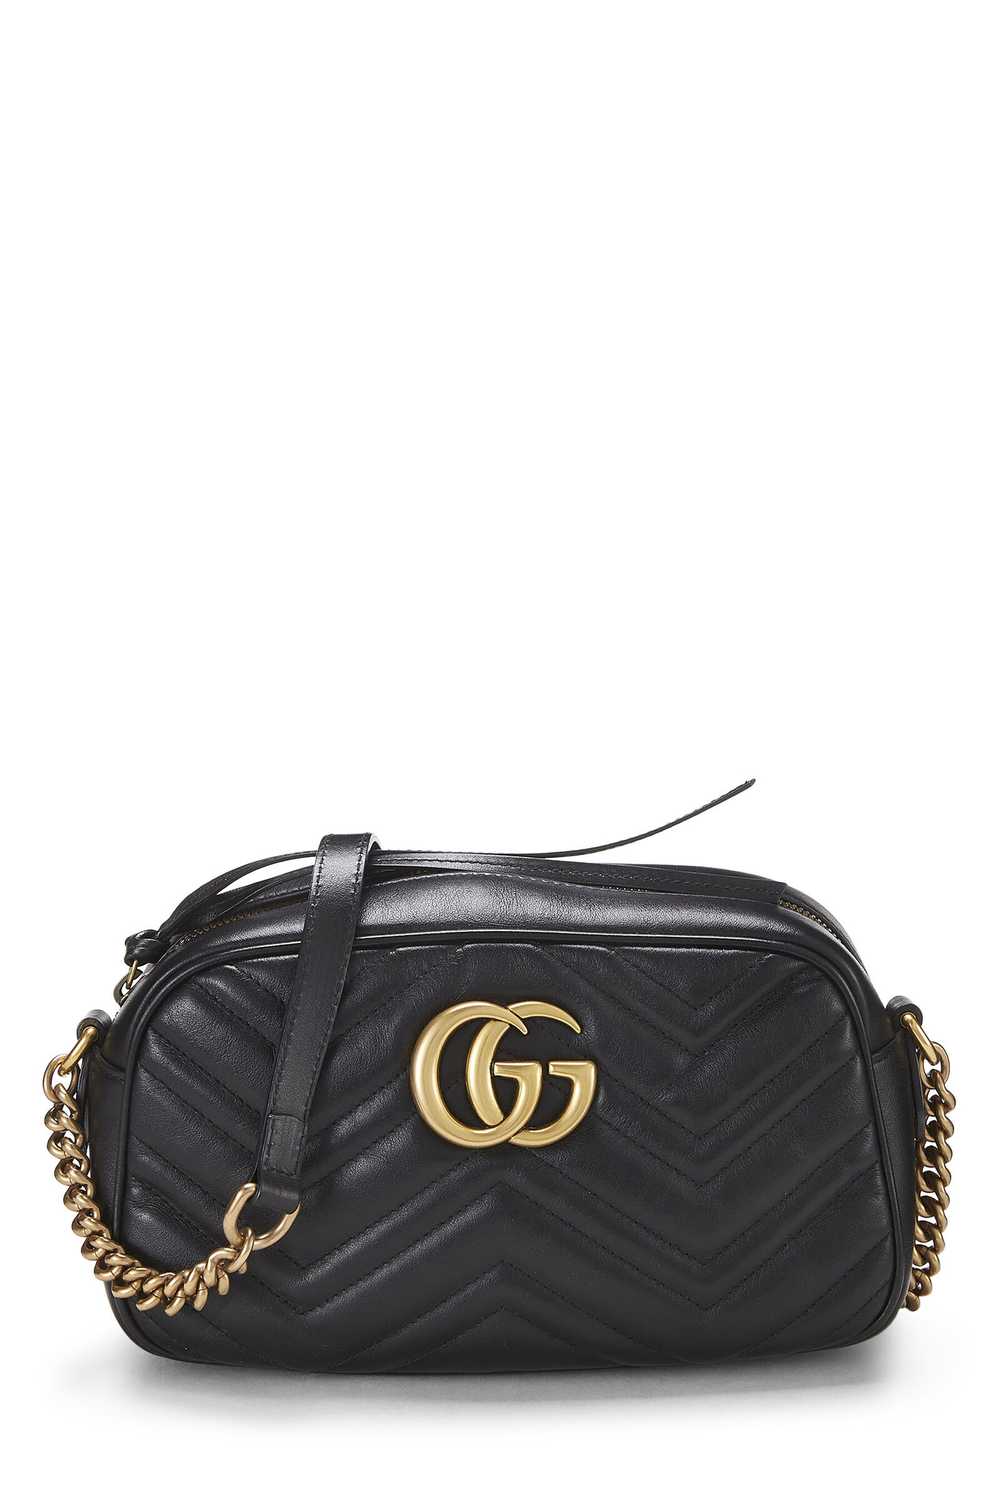 Black Leather GG Marmont Crossbody Small - image 1